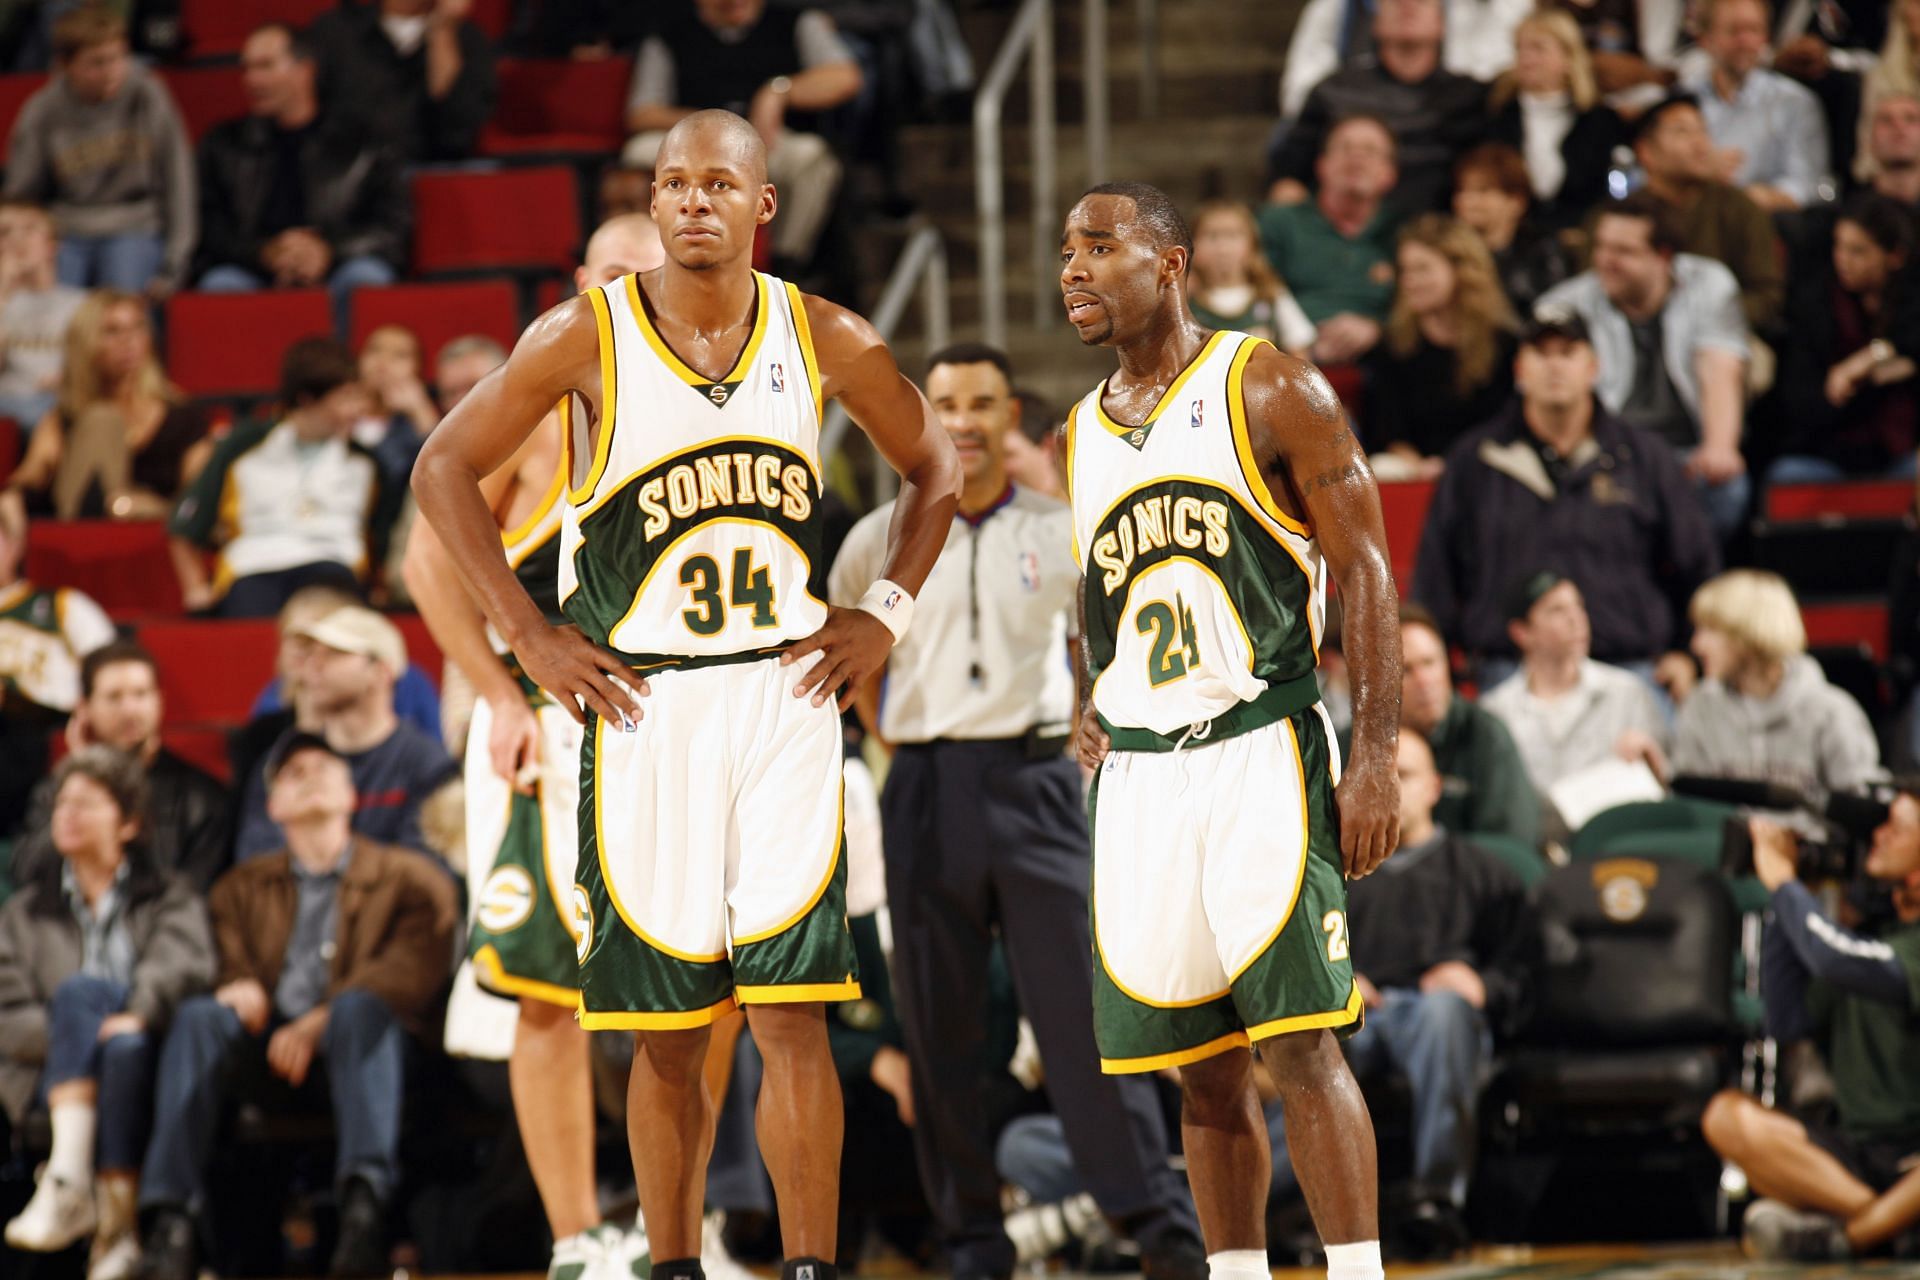 Ray Allen and Mateen Cleaves of the Seattle Supersonics